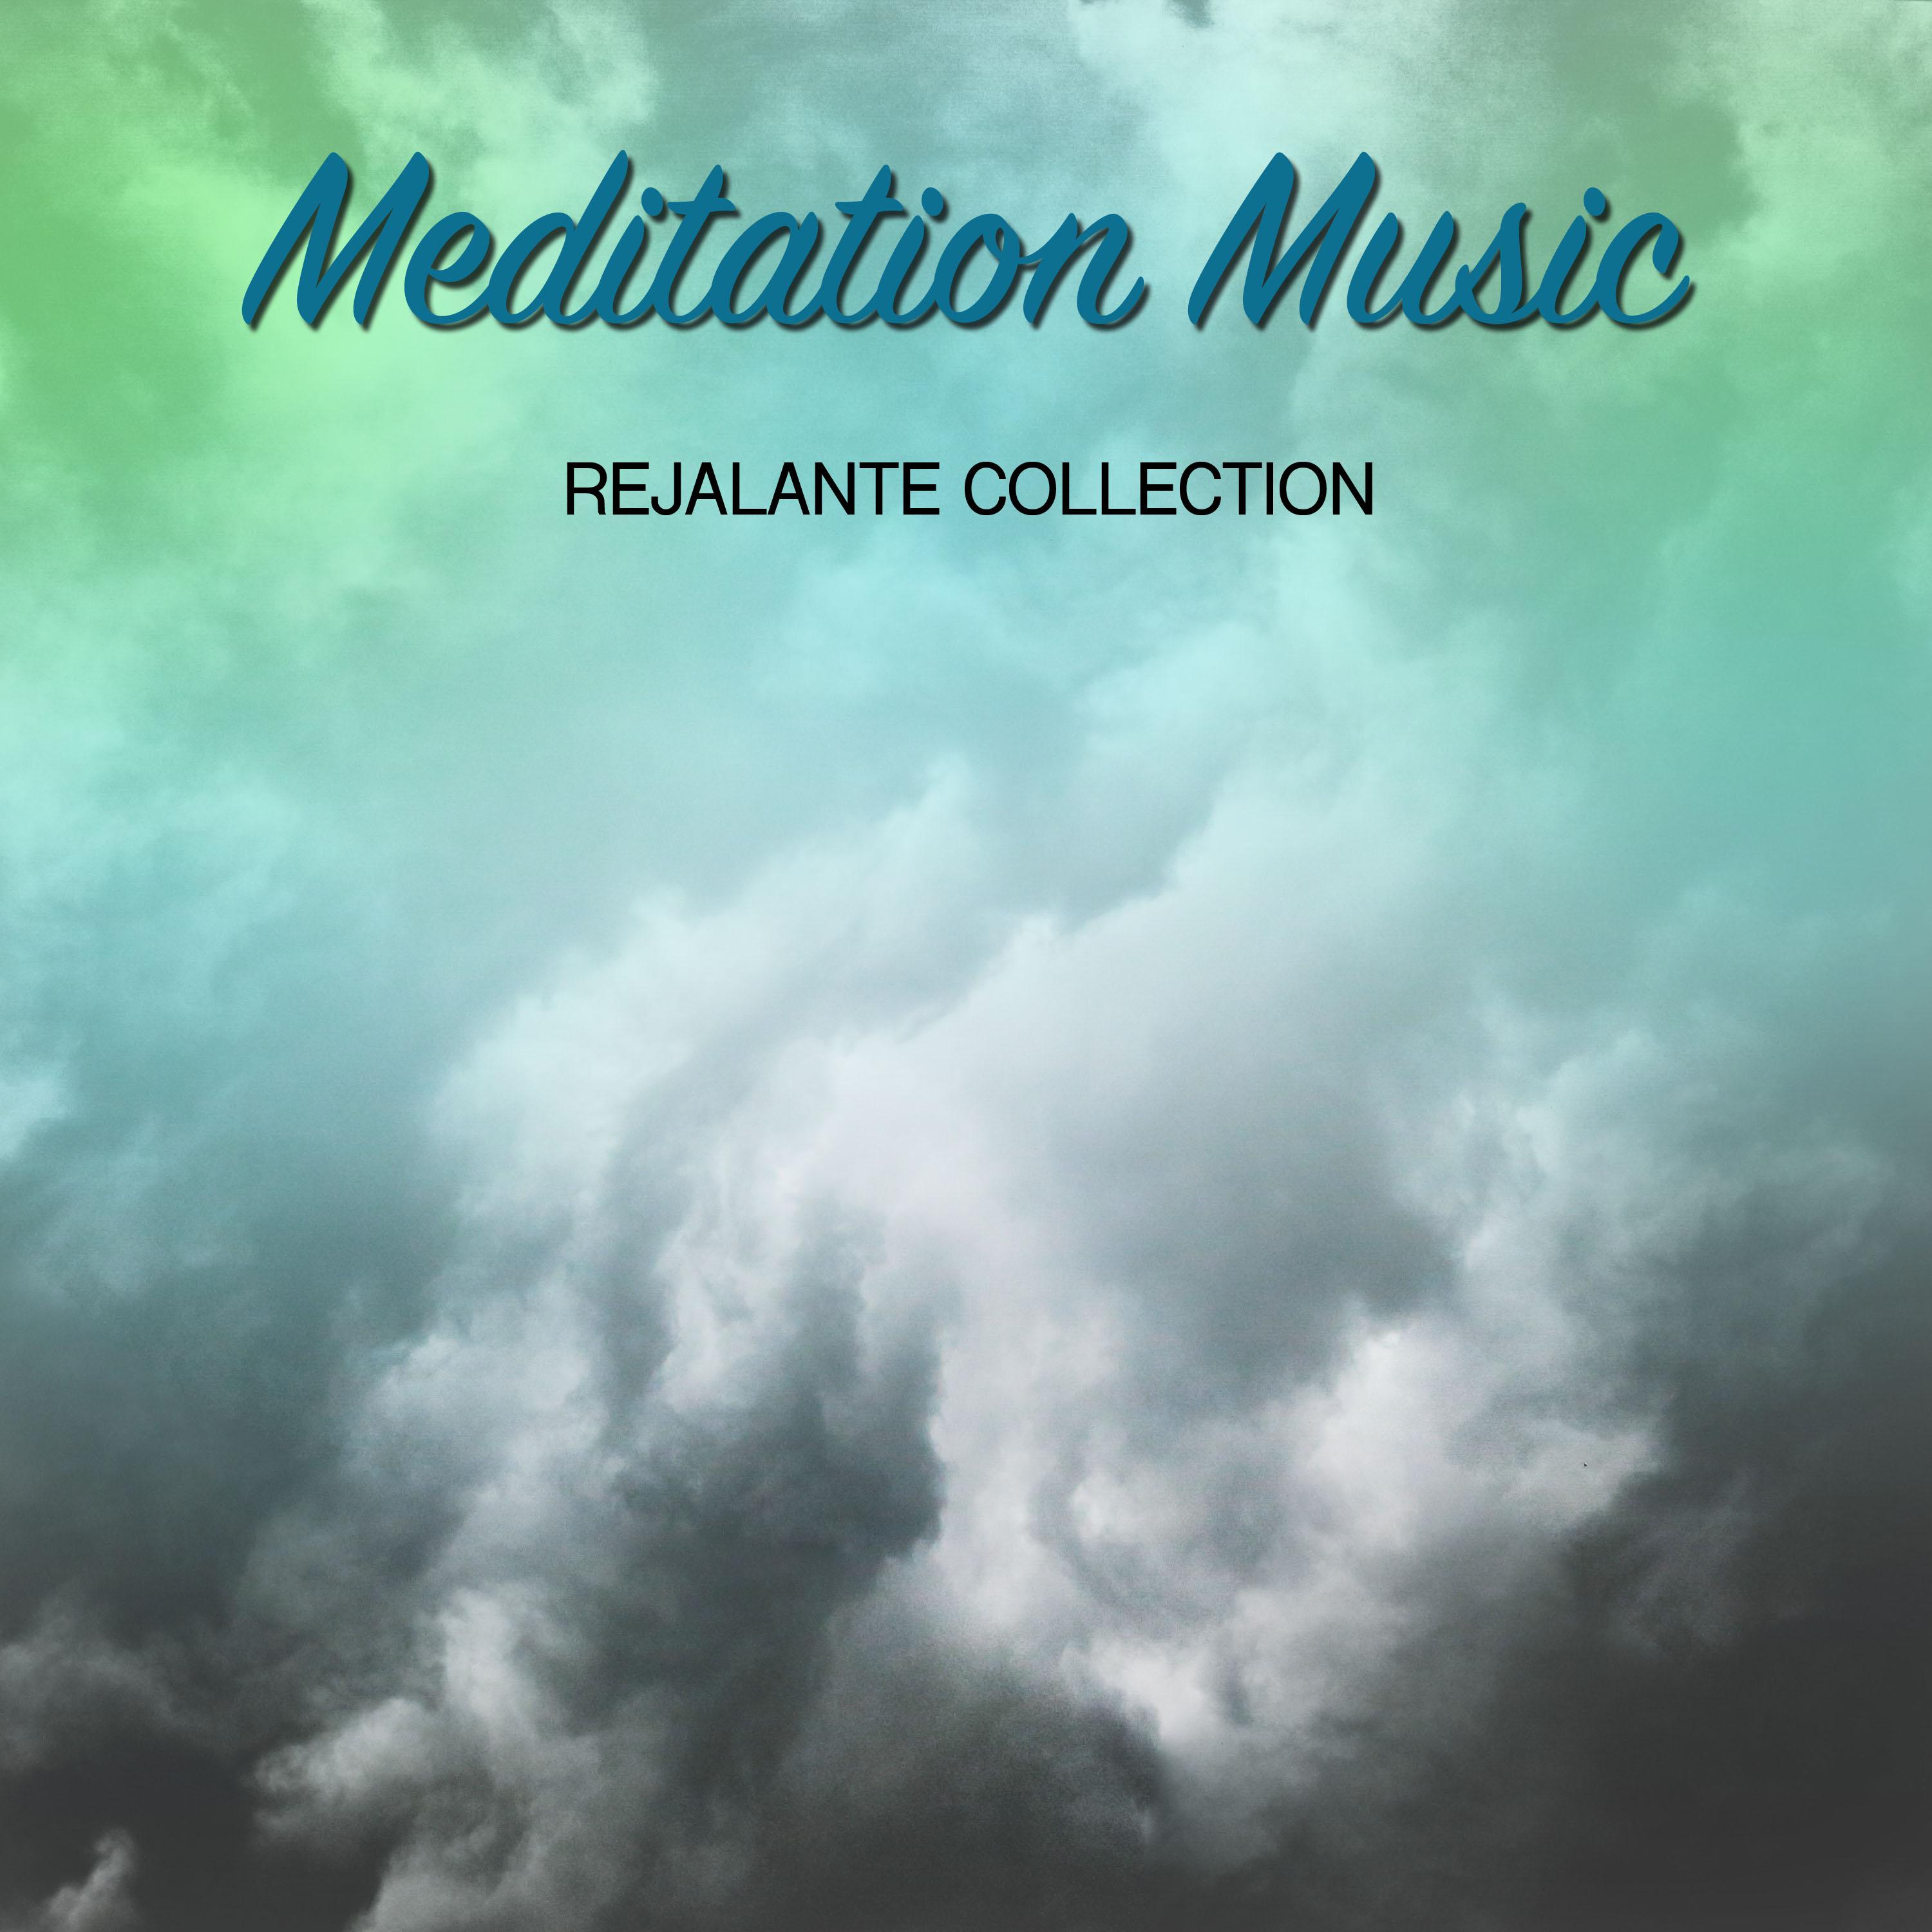 2018 An Relajante Collection: Meditation Music